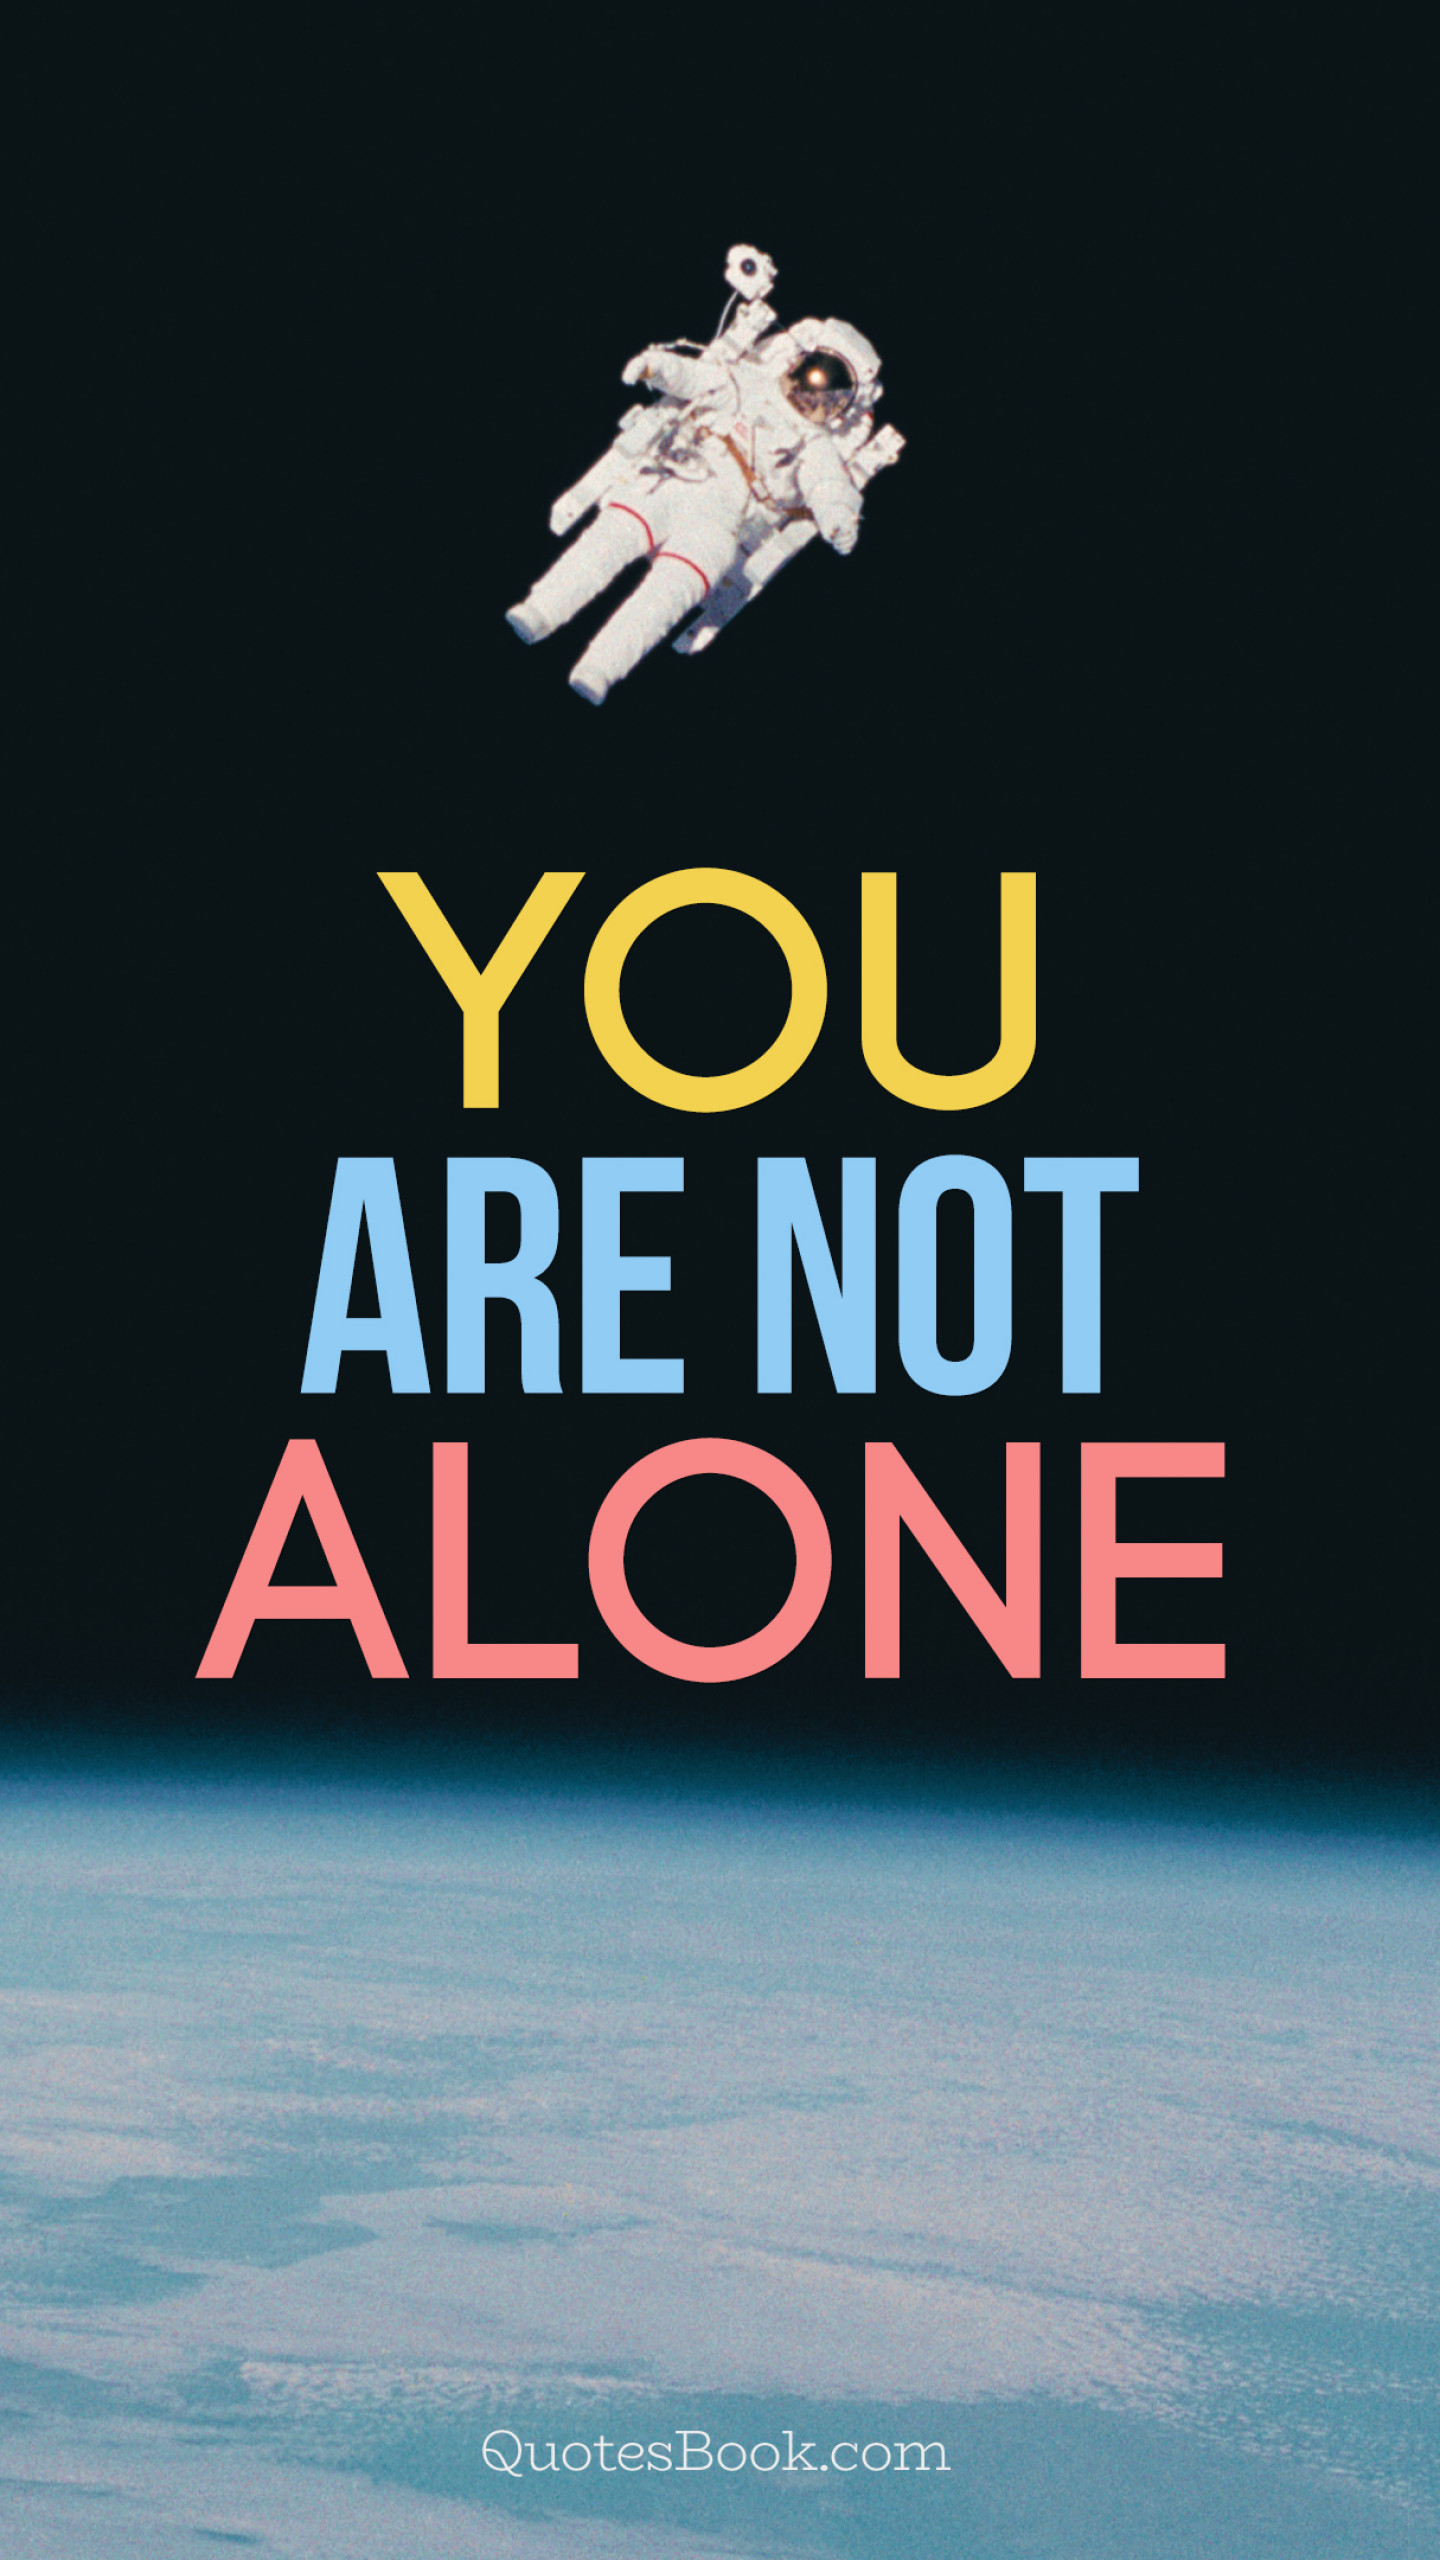 You Are Not Alone QuotesBook